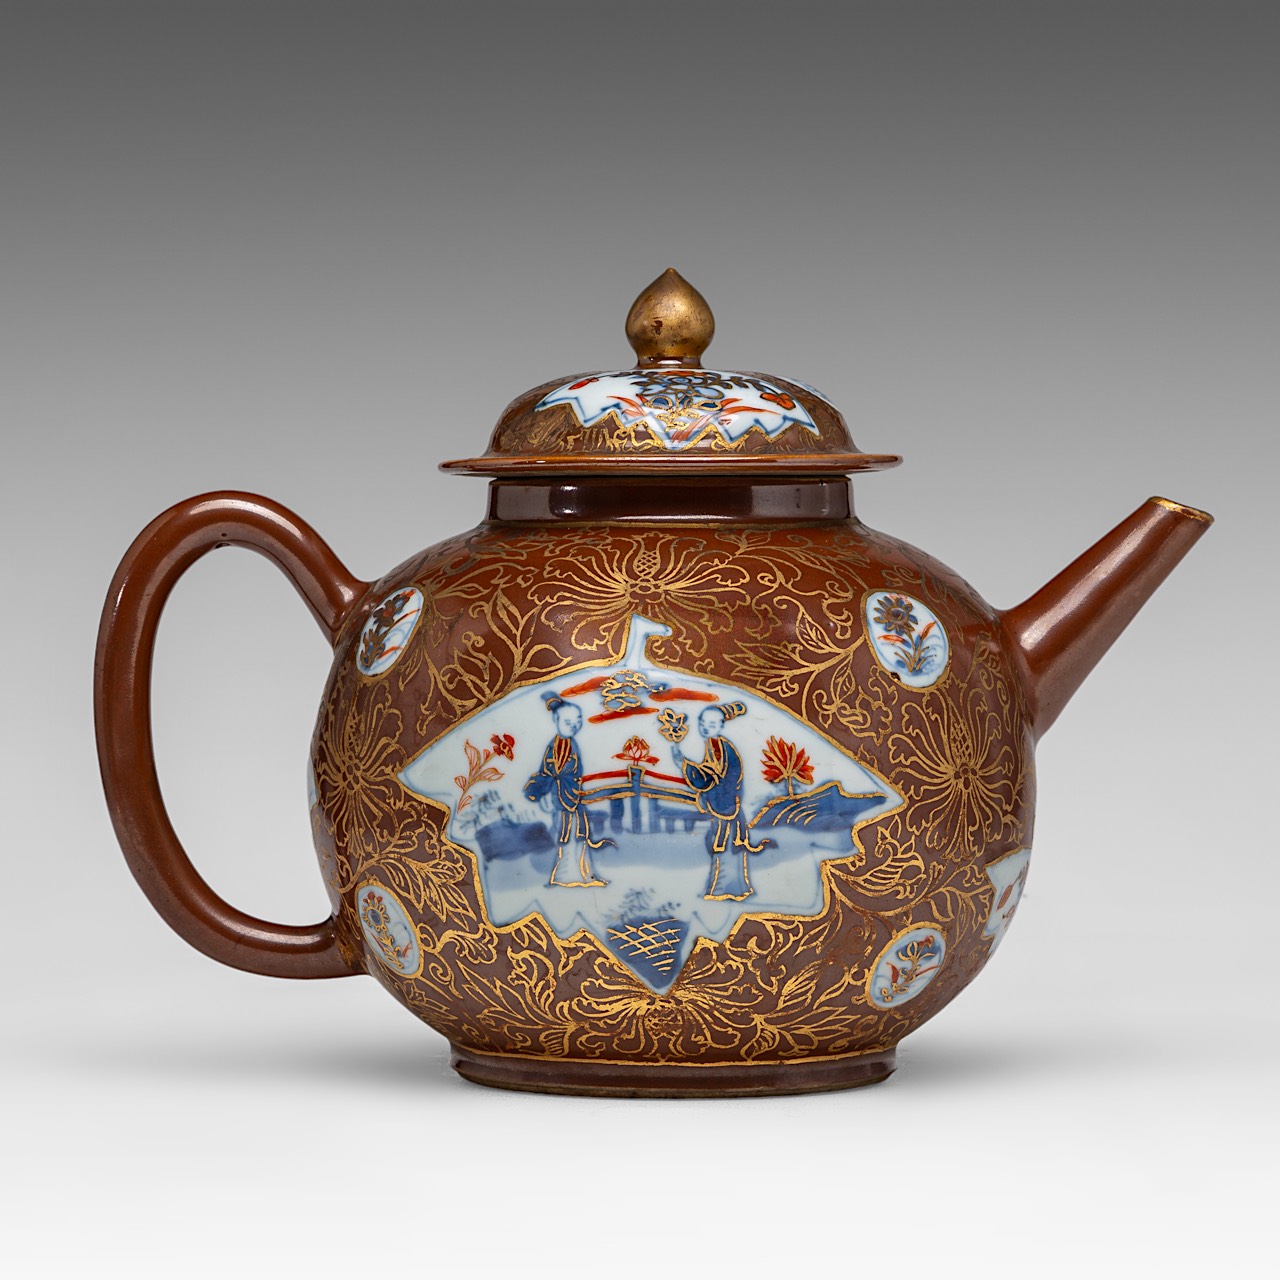 An unusual imposing Chinese cafe-au-lait and Imari teapot, Kangxi period, H 19,5 - L 27,5 cm - added - Image 5 of 17